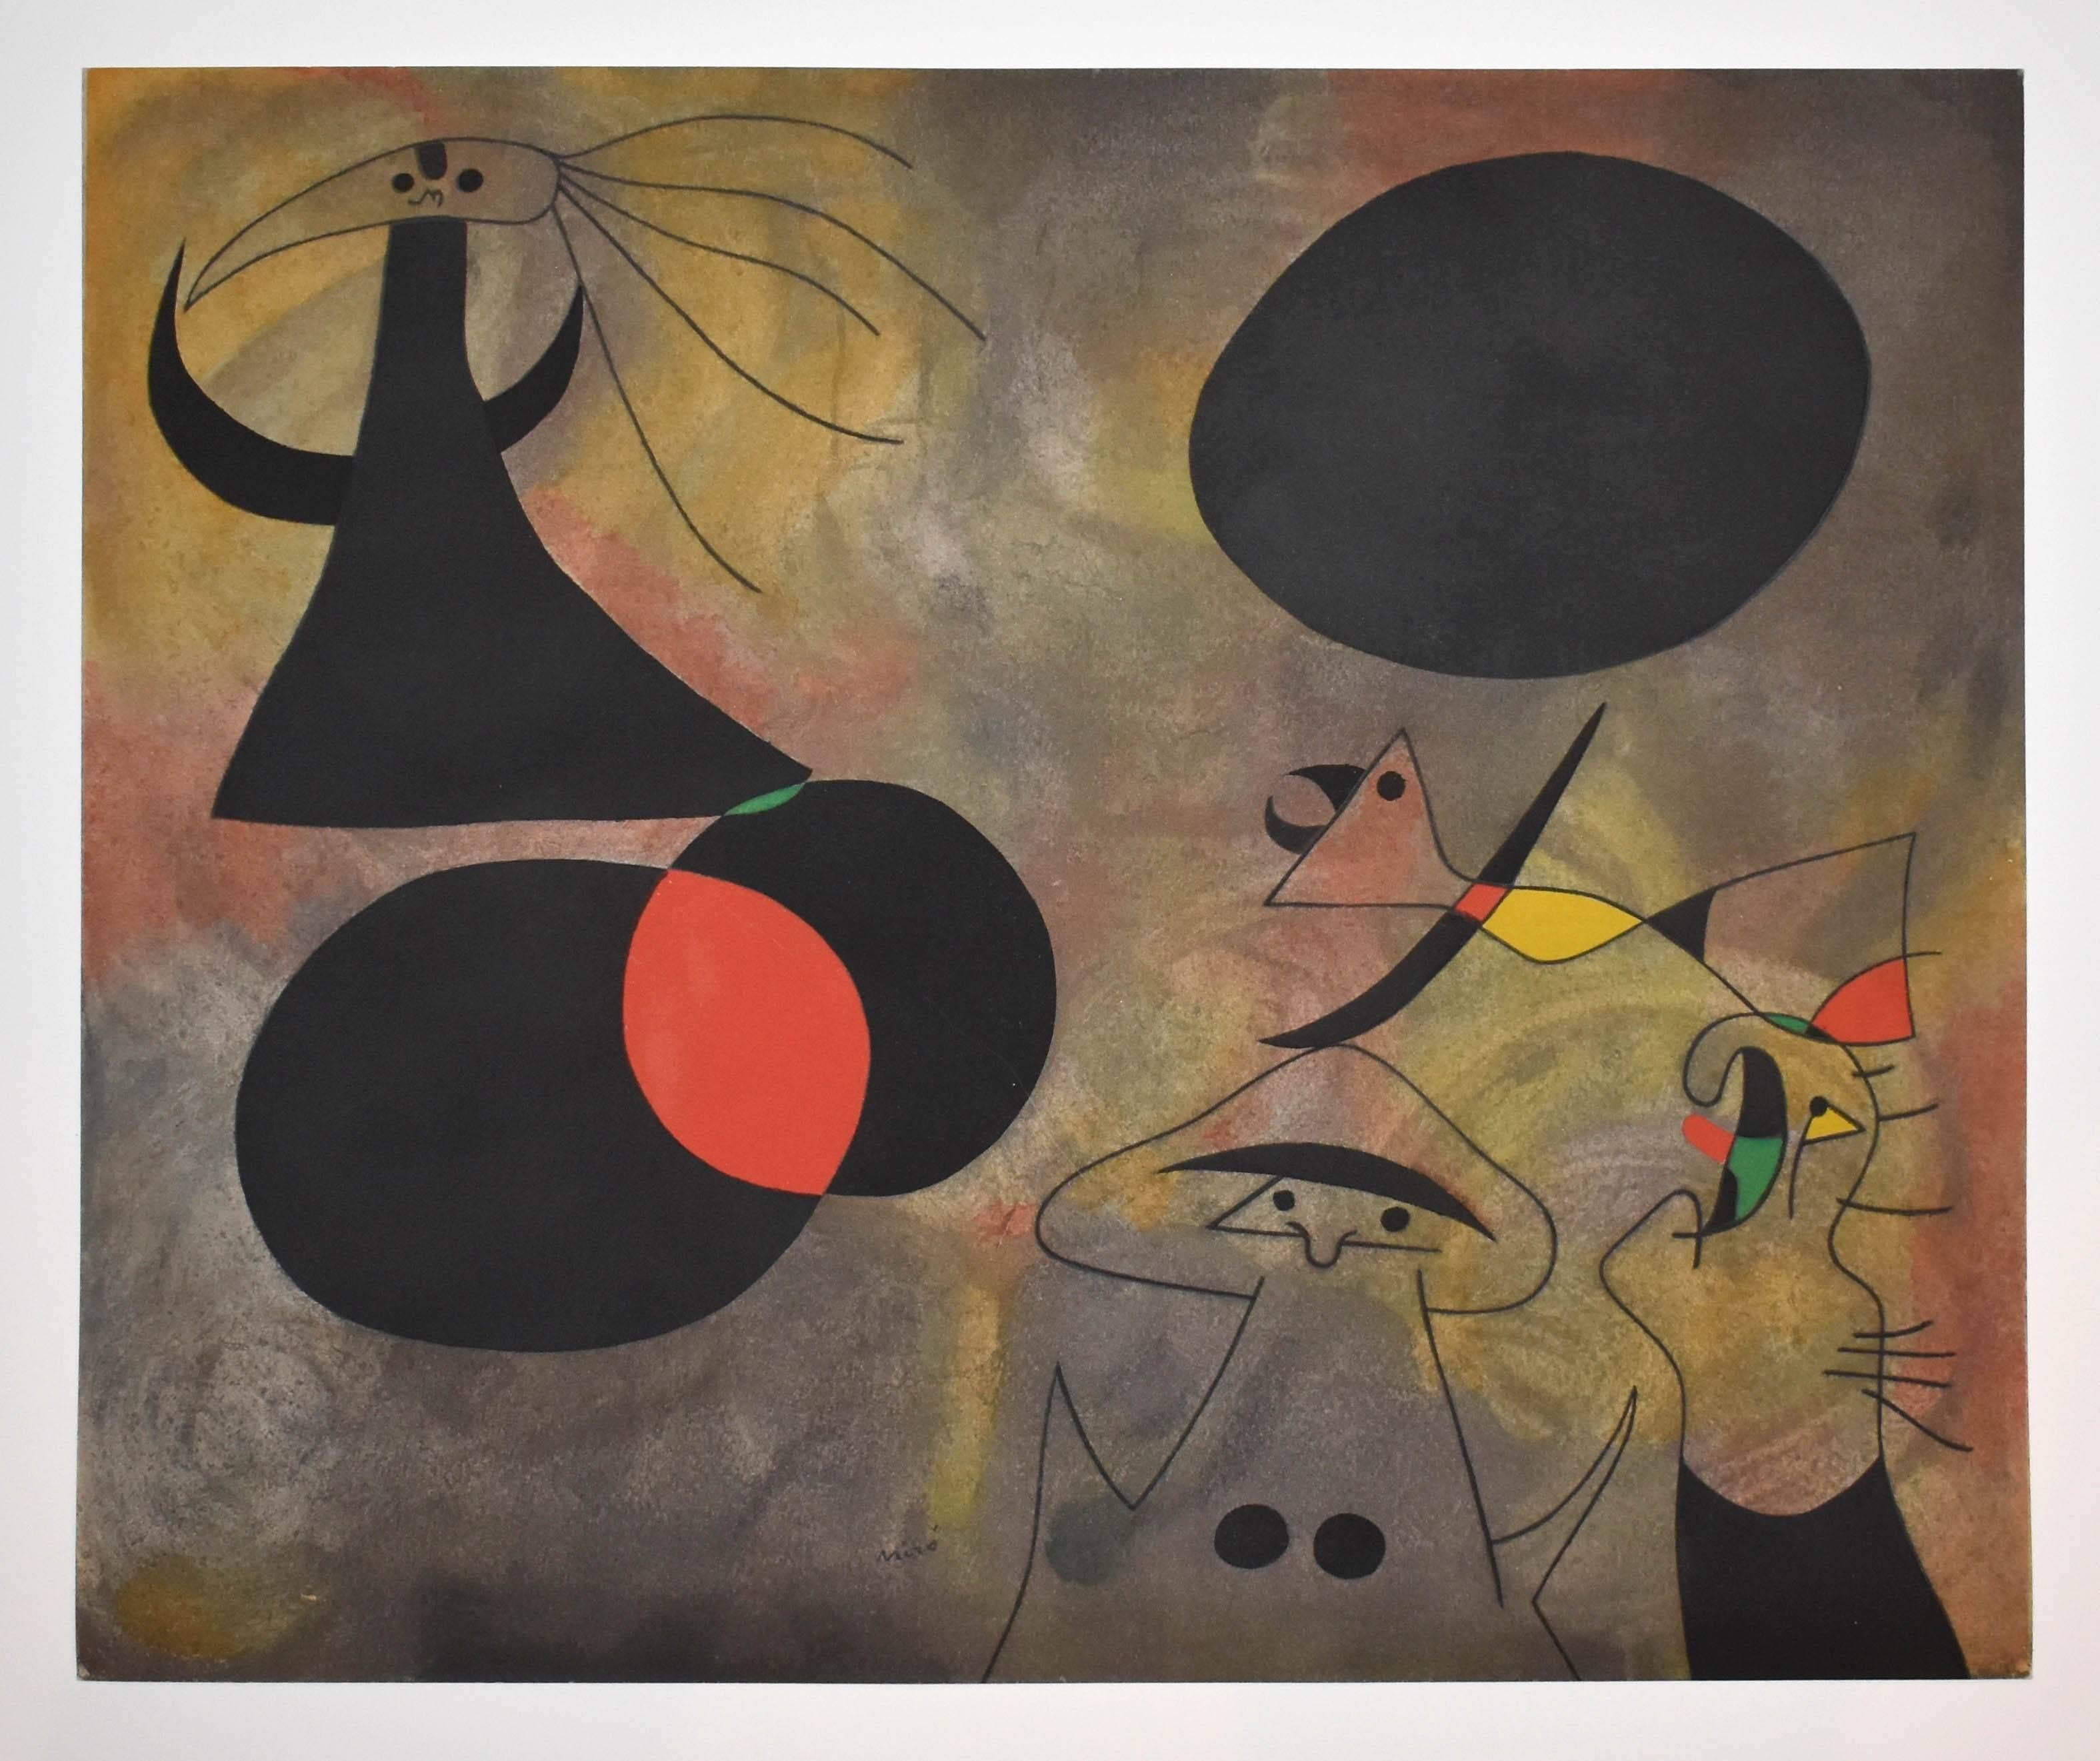 Le lever du soleil (Sunrise), Plate I, from Constellations - Print by (after) Joan Miró